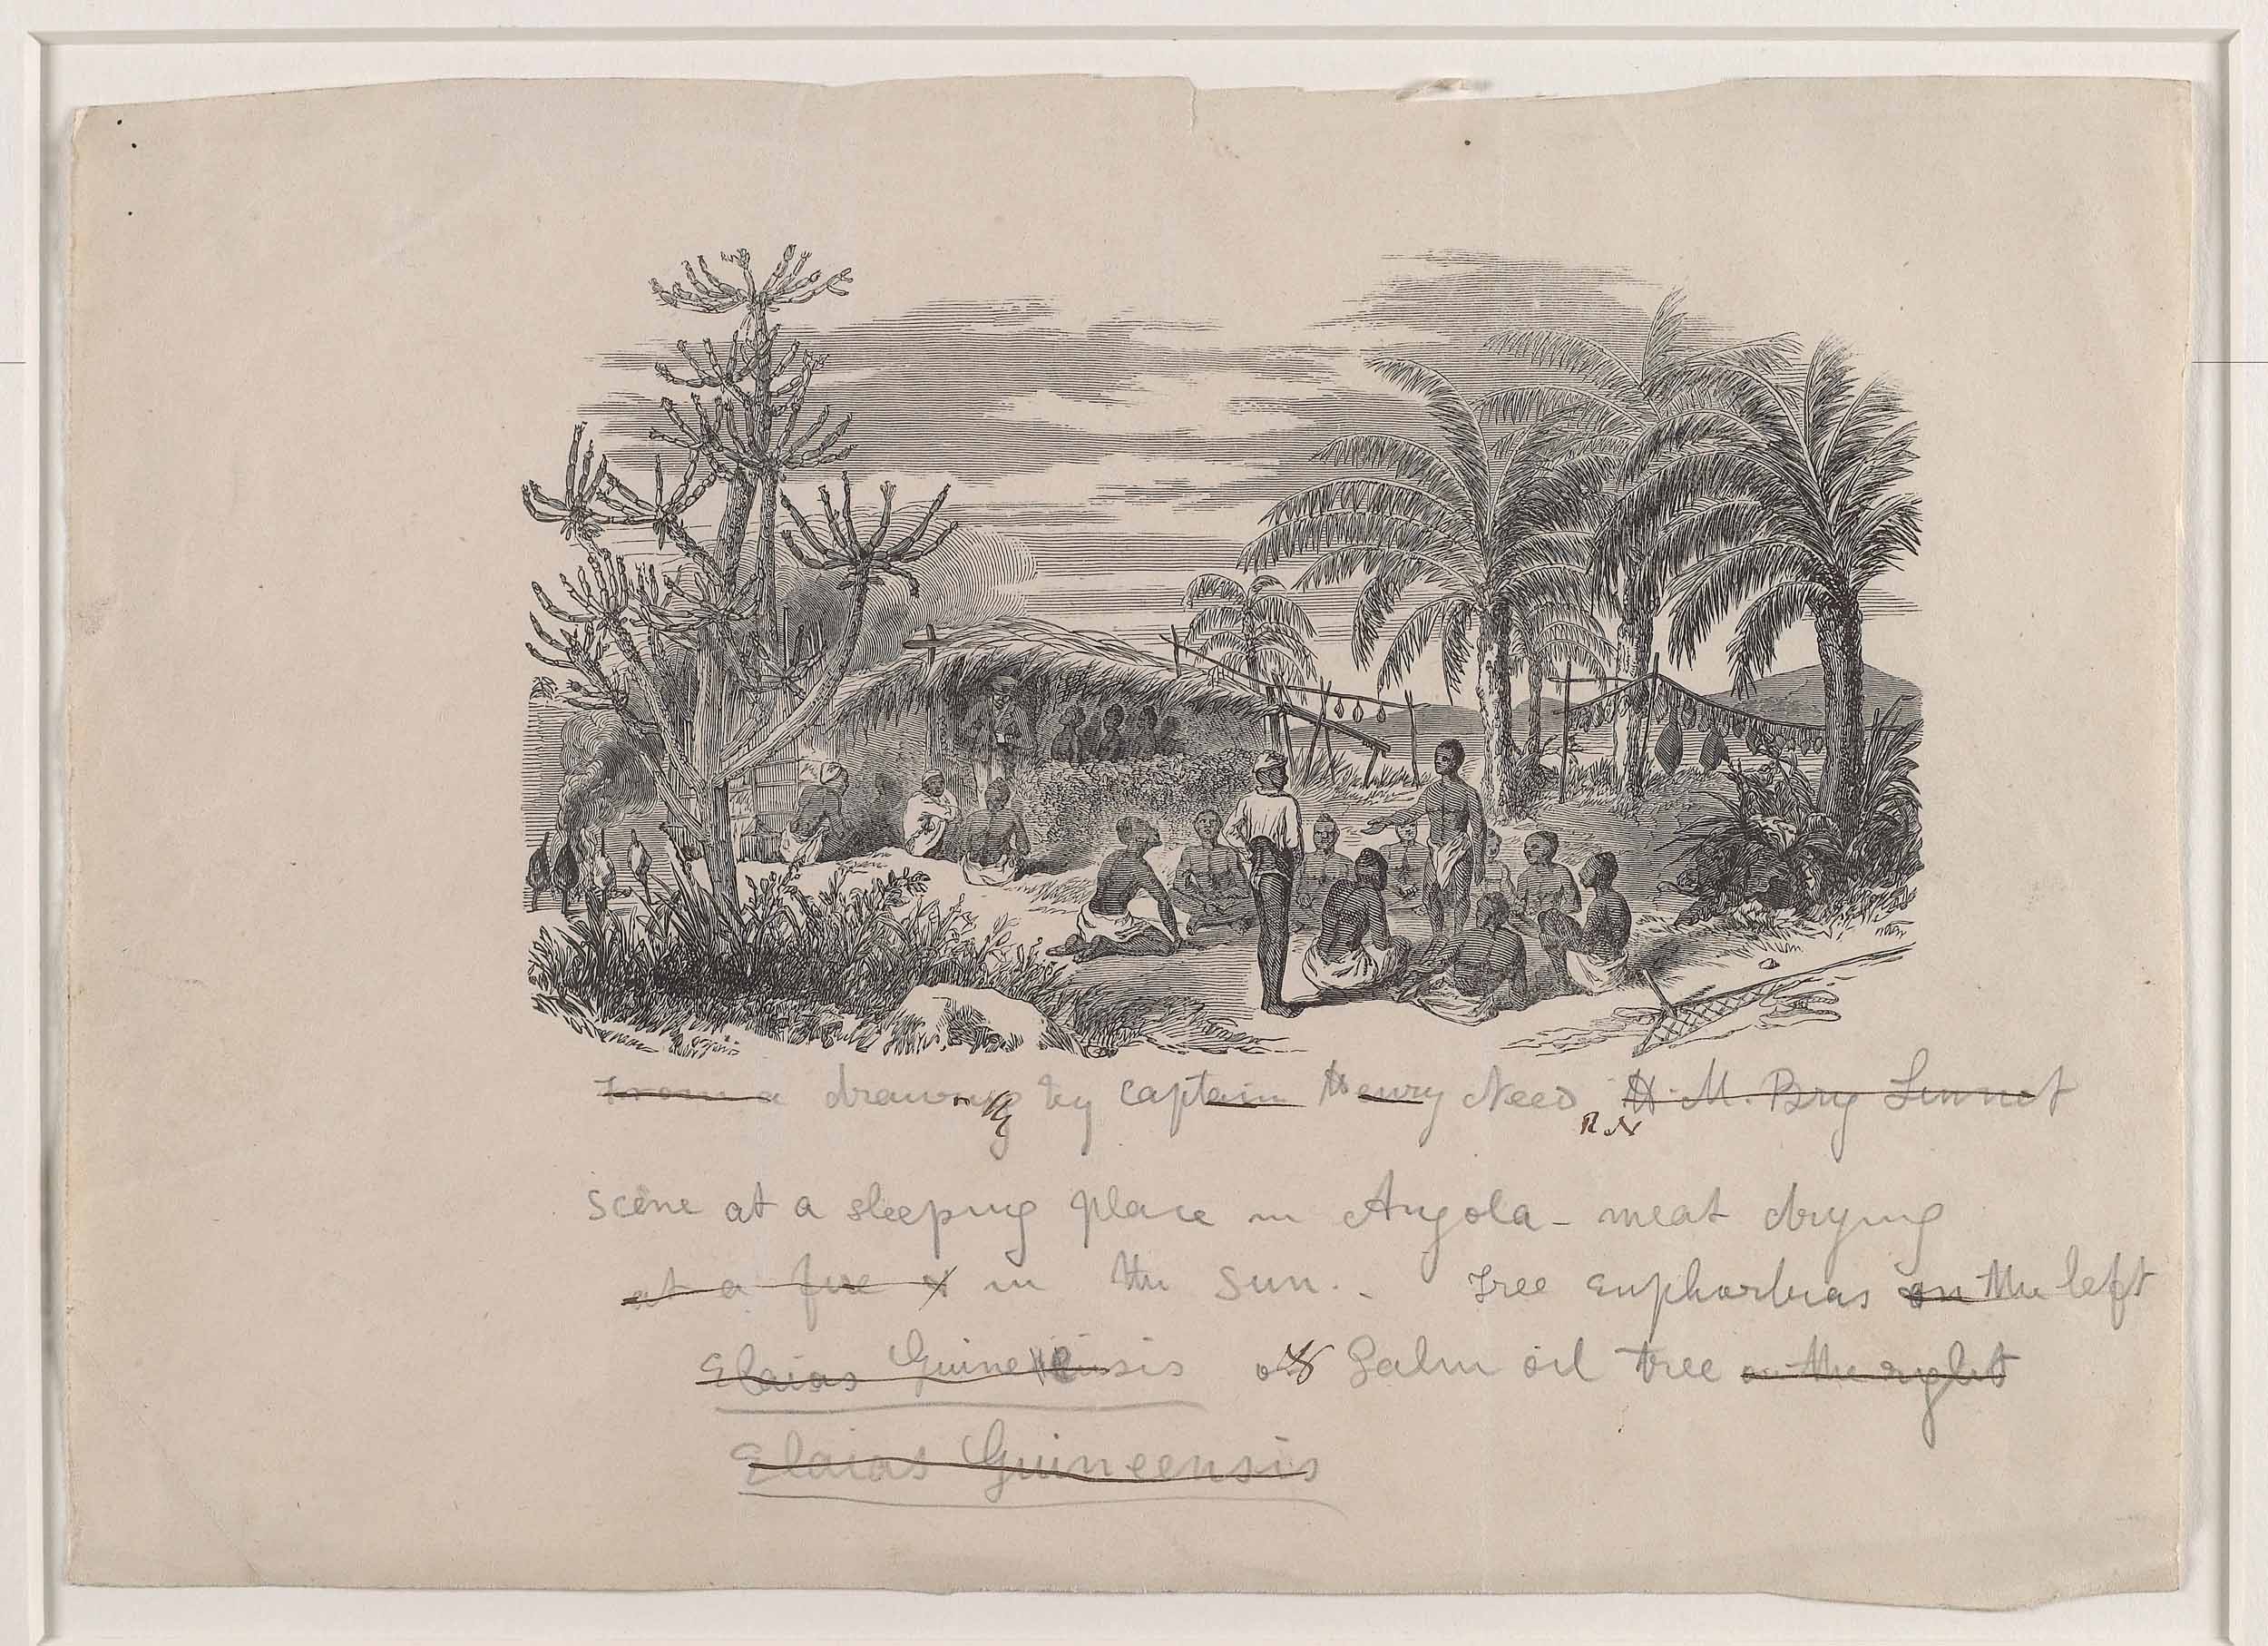 David Livingstone, Scene at a sleeping-place in Angola